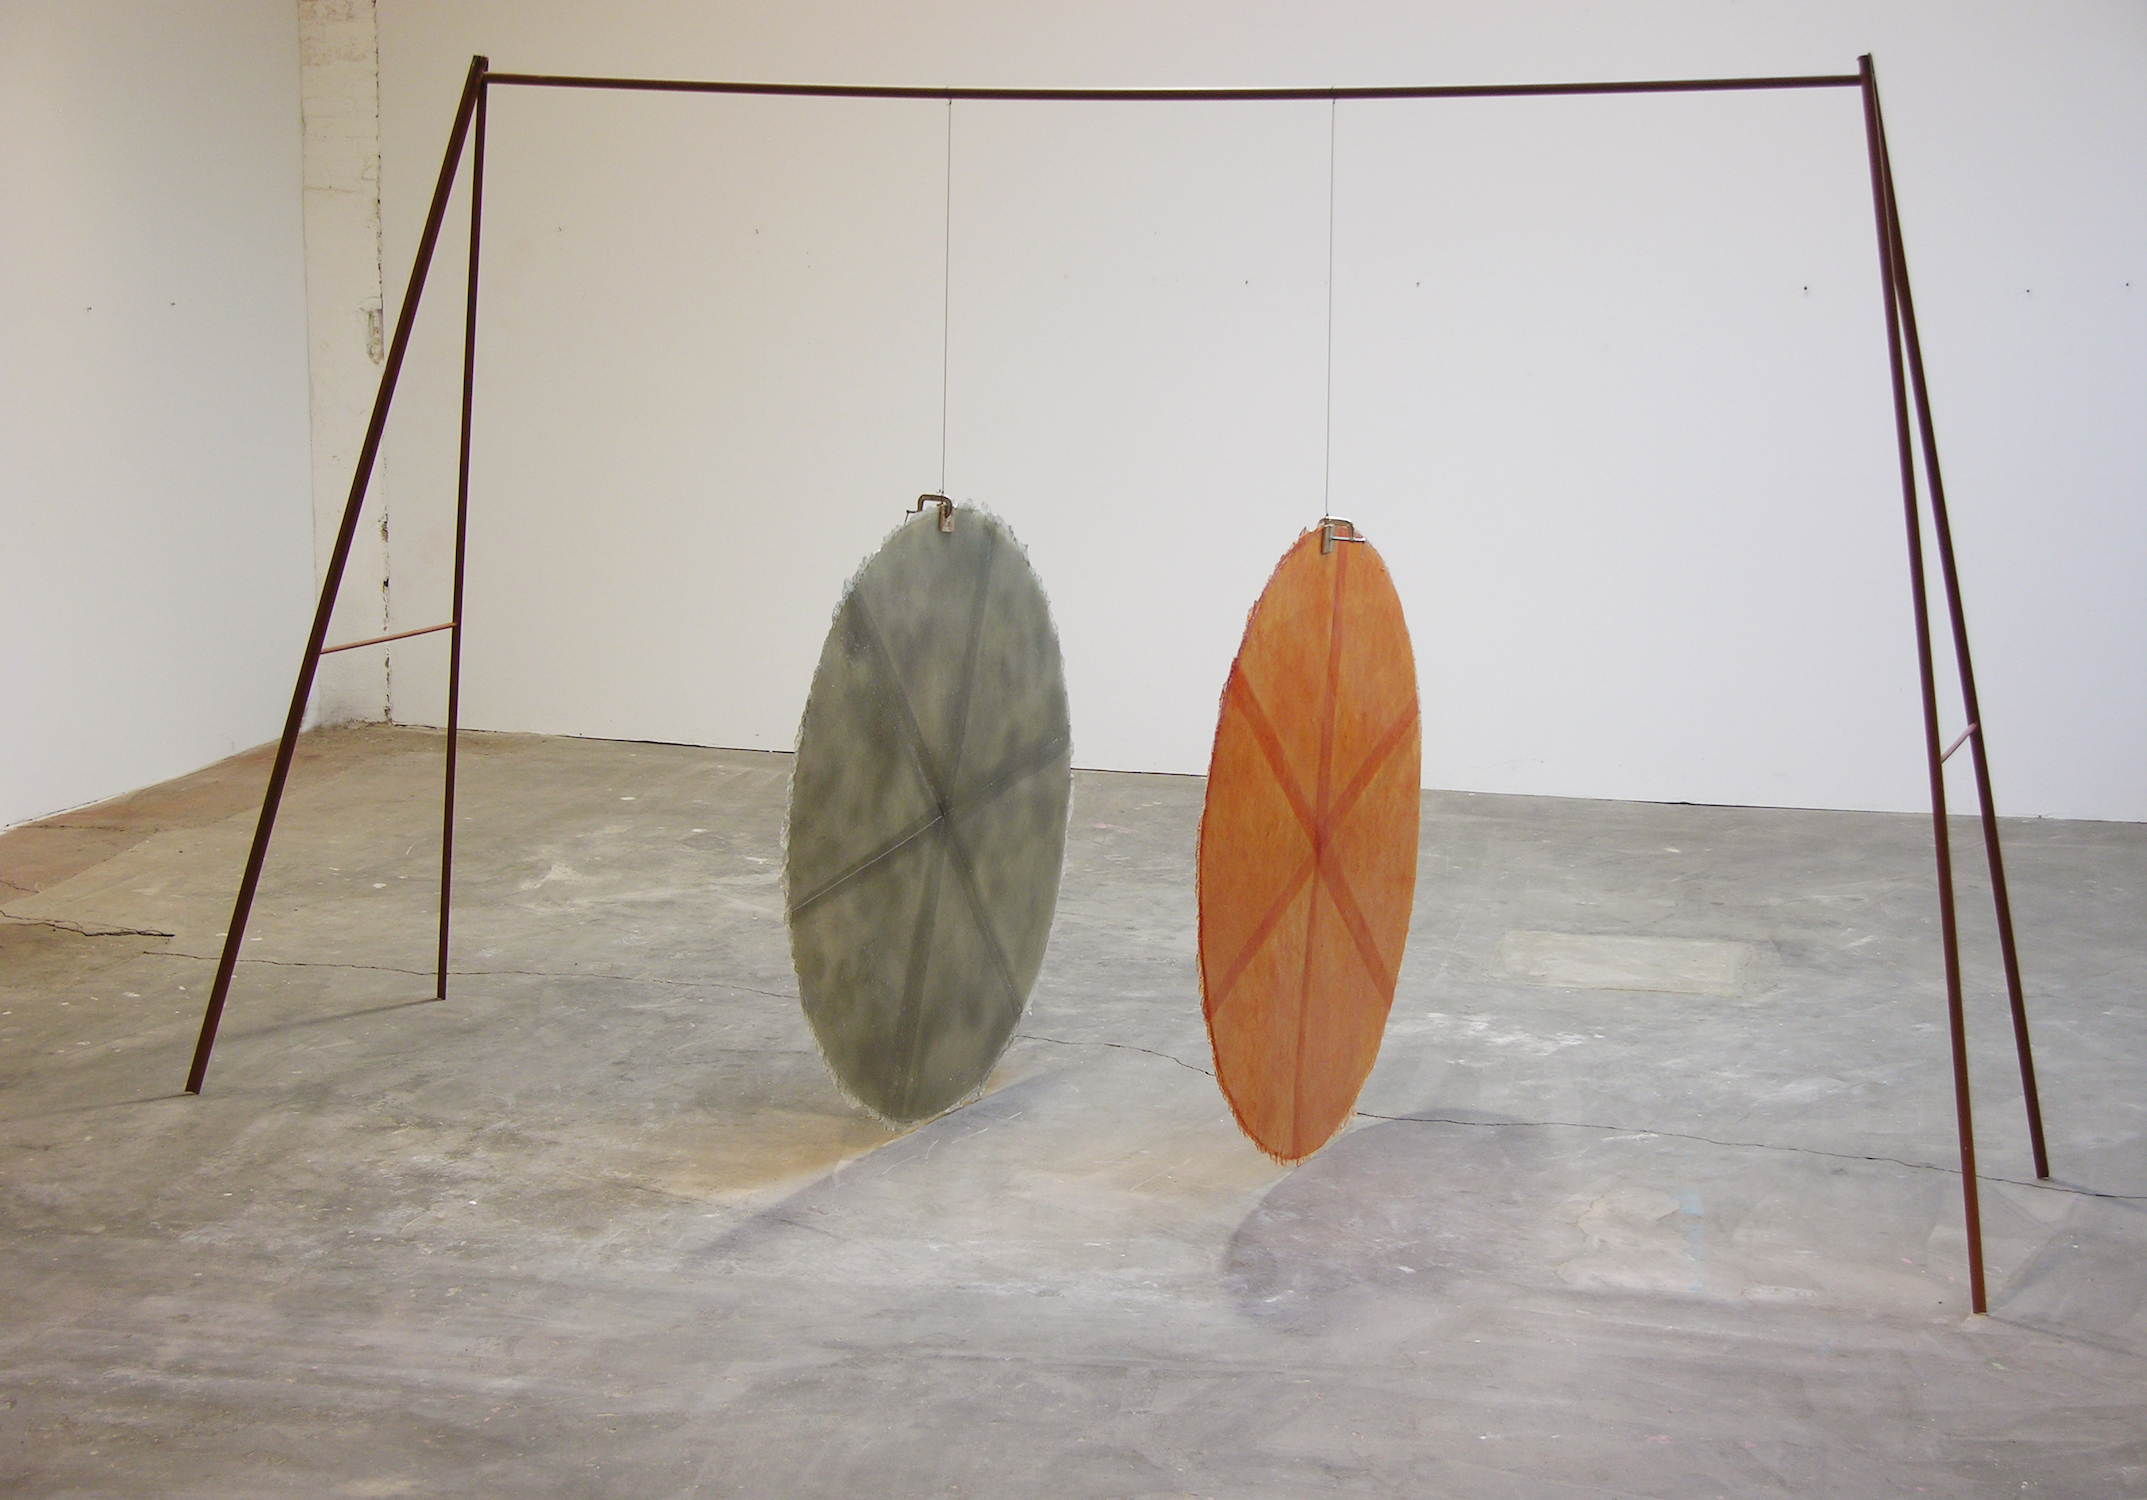  Set (2014), synthetic polymer resin, pigment, c clamps and steel, 40 x 80 x 160 inches (1 x 1.5 x 4 m)    